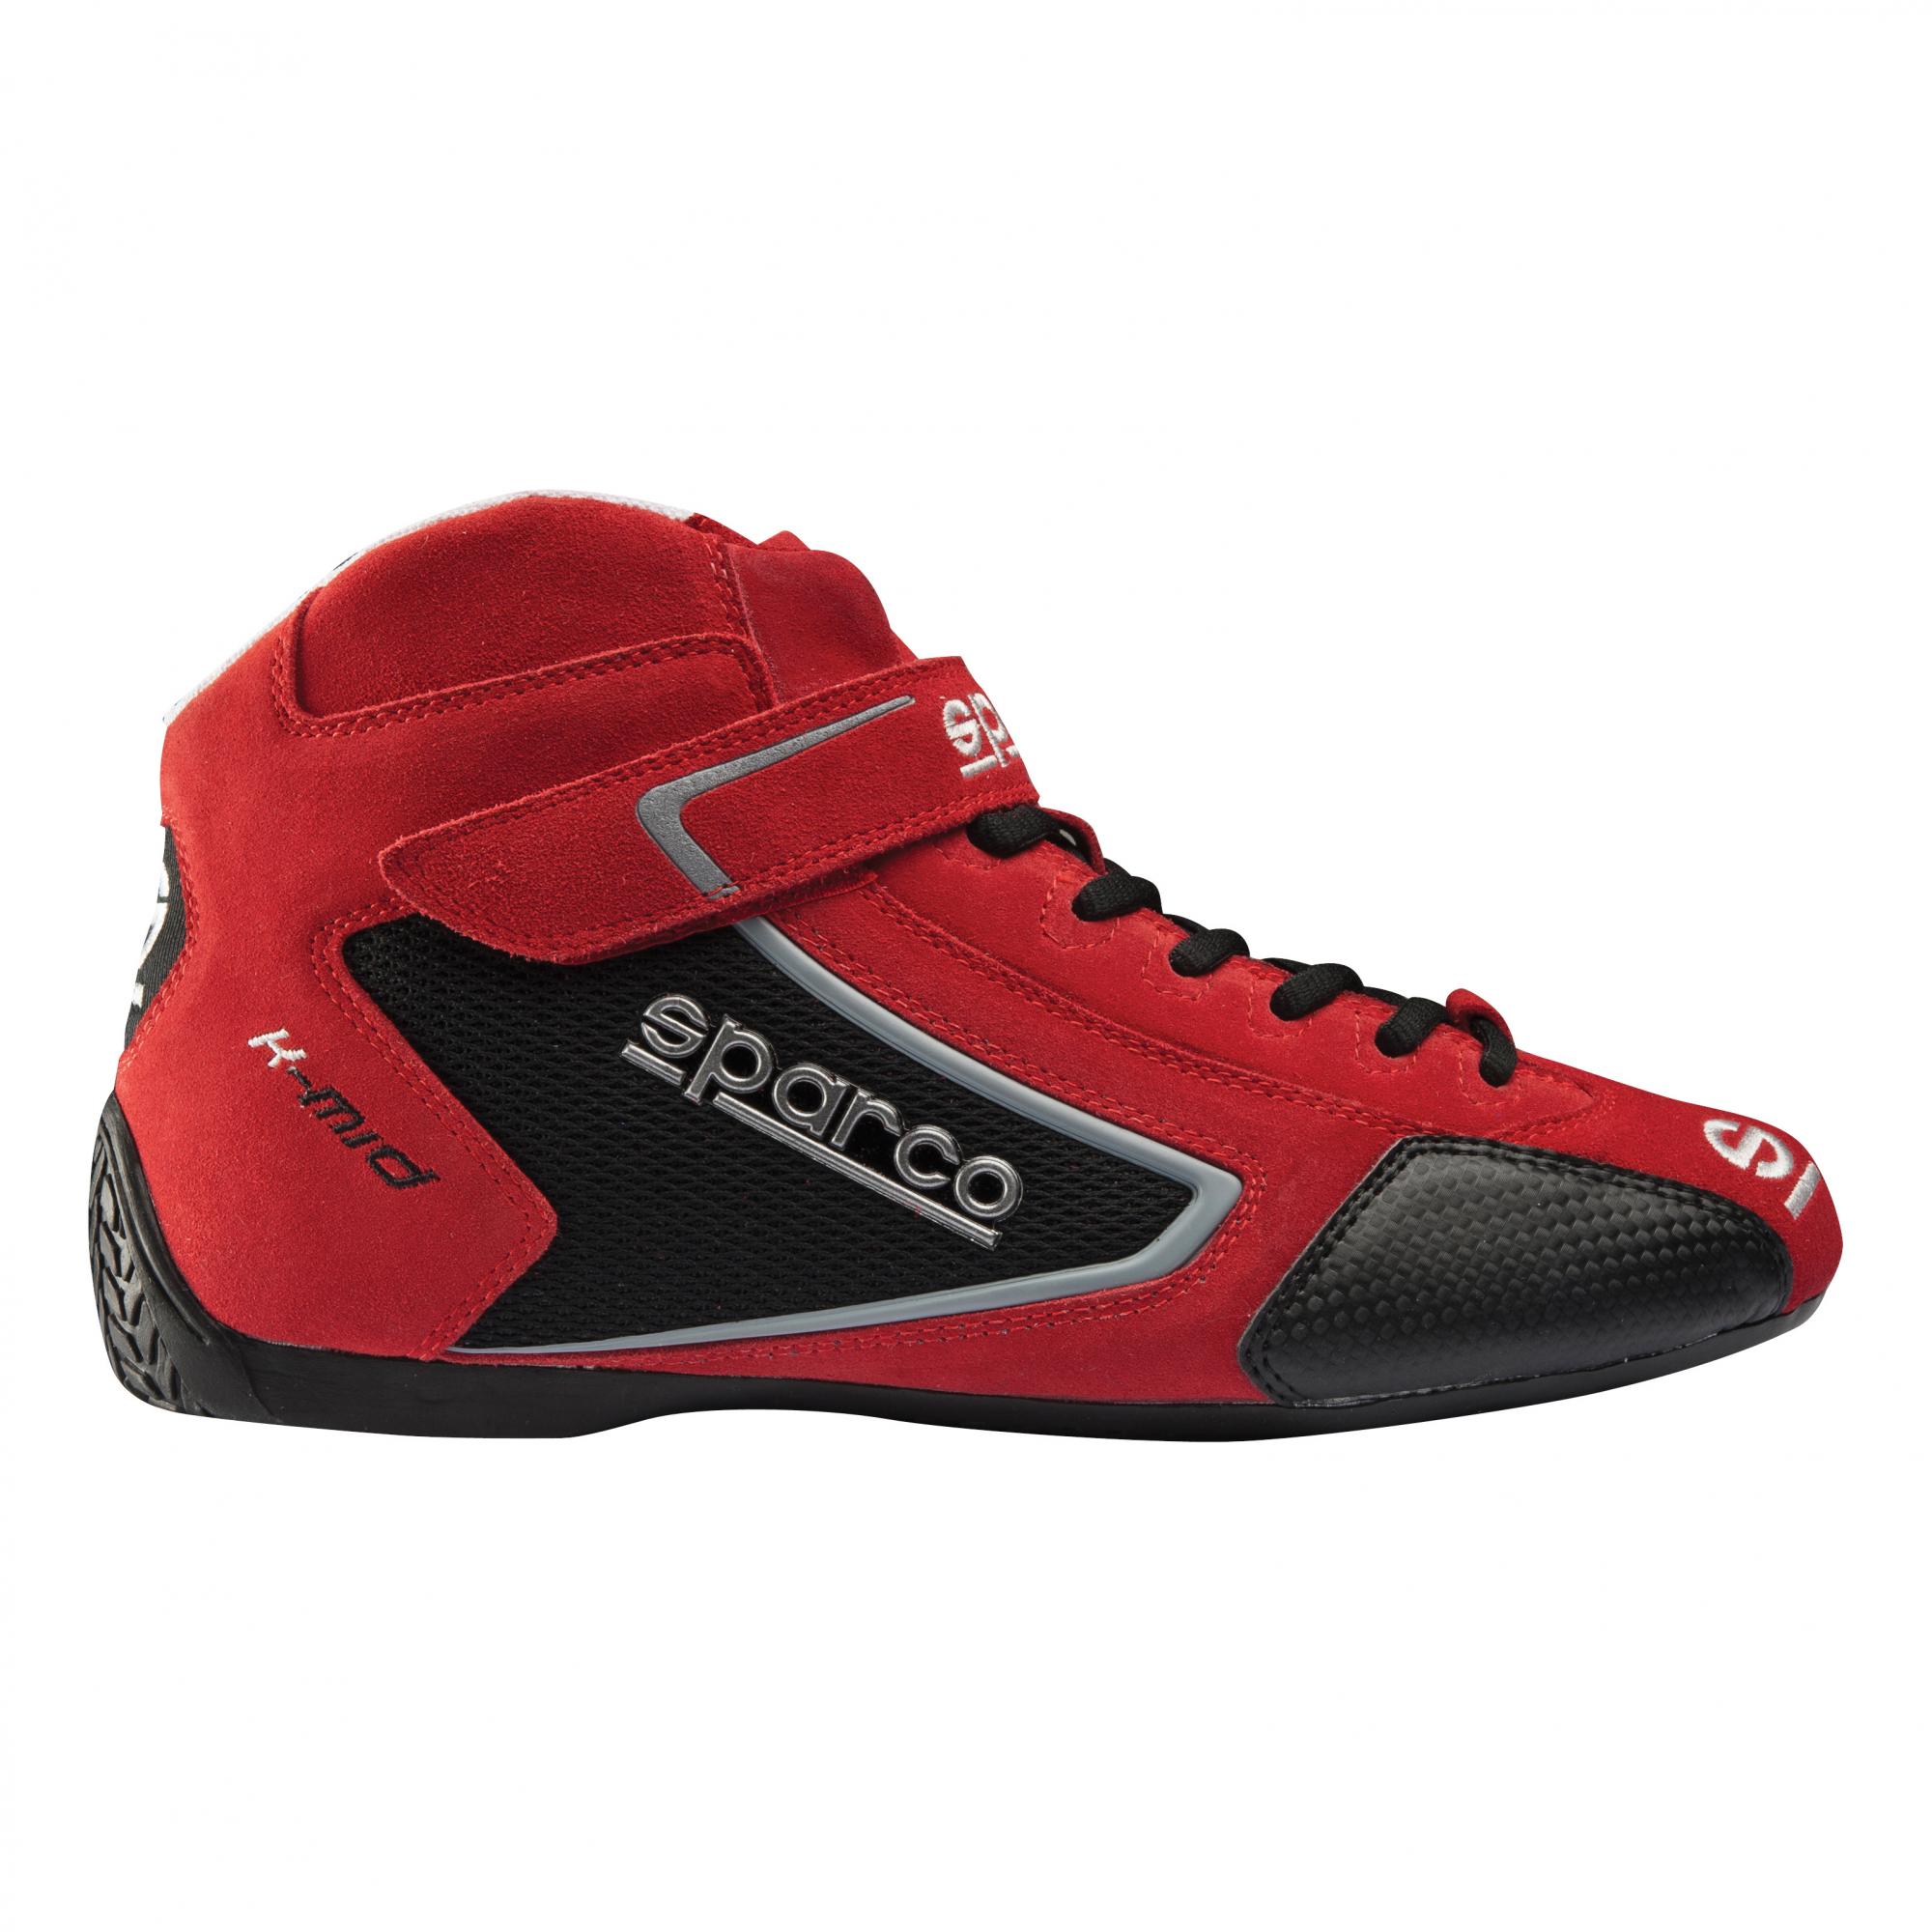 Sparco K-Mid SL3 Kart Boots In Red